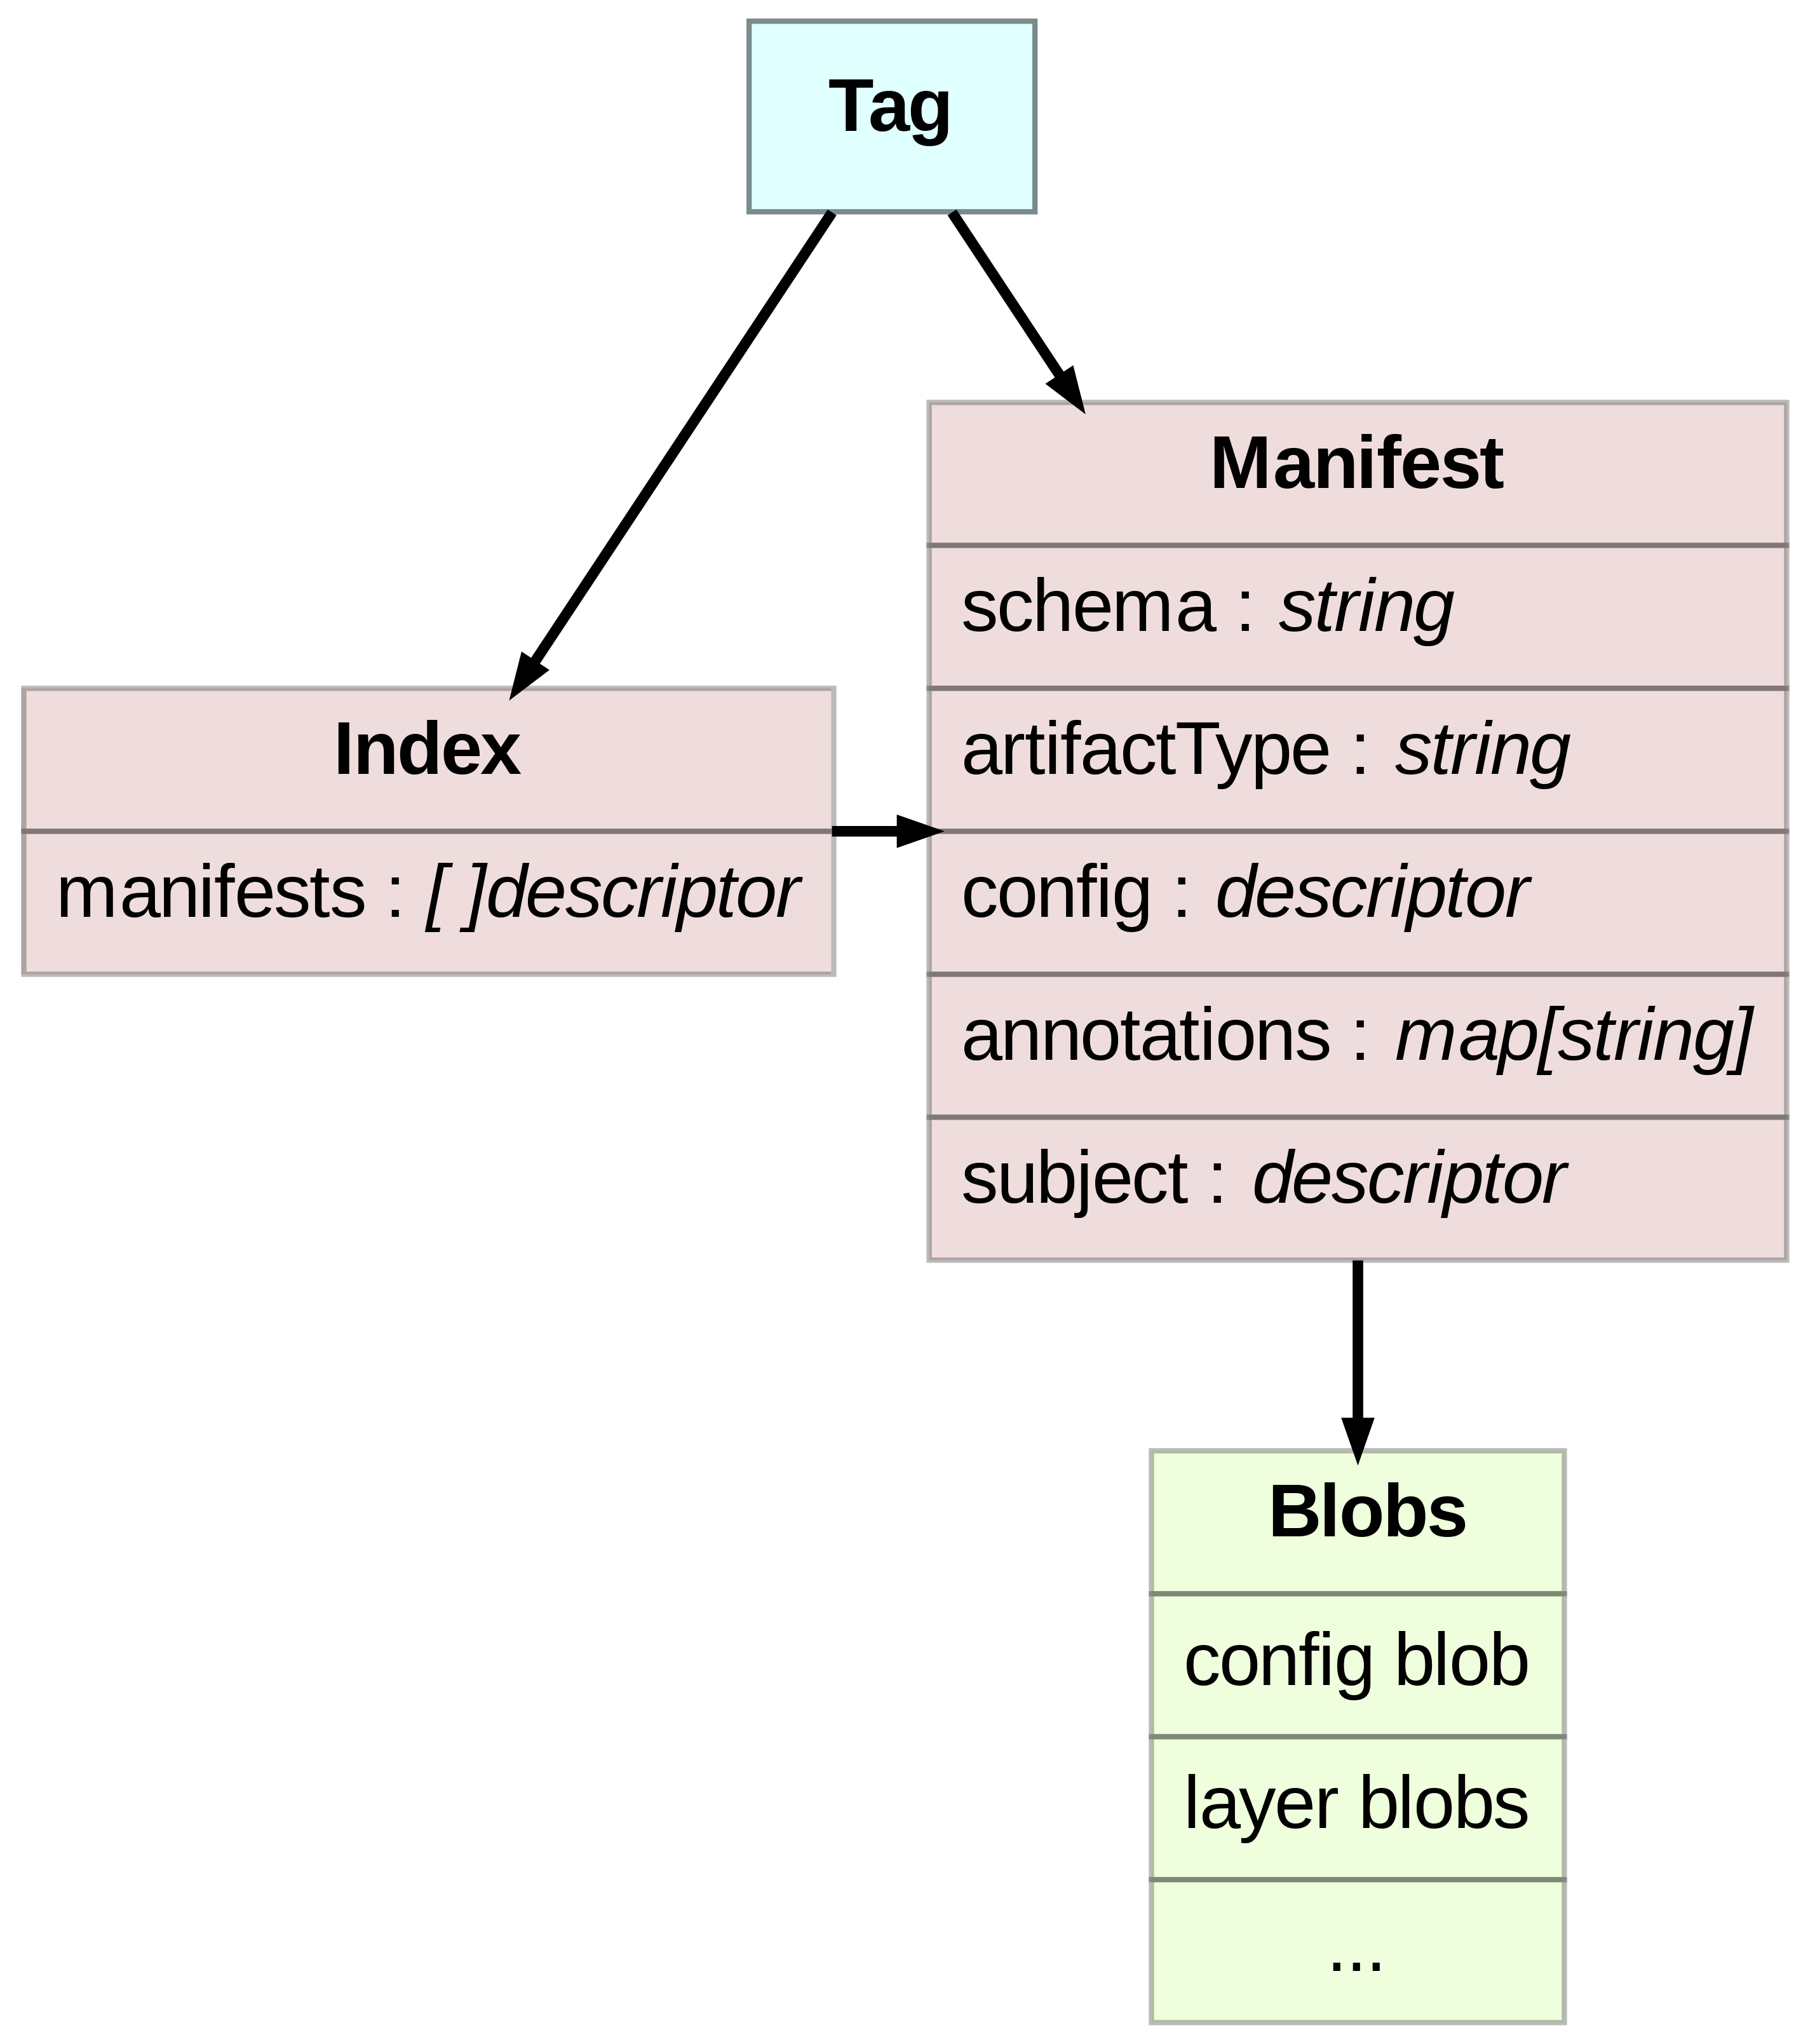 Diagram showing relationship and fiels of a tag image and index